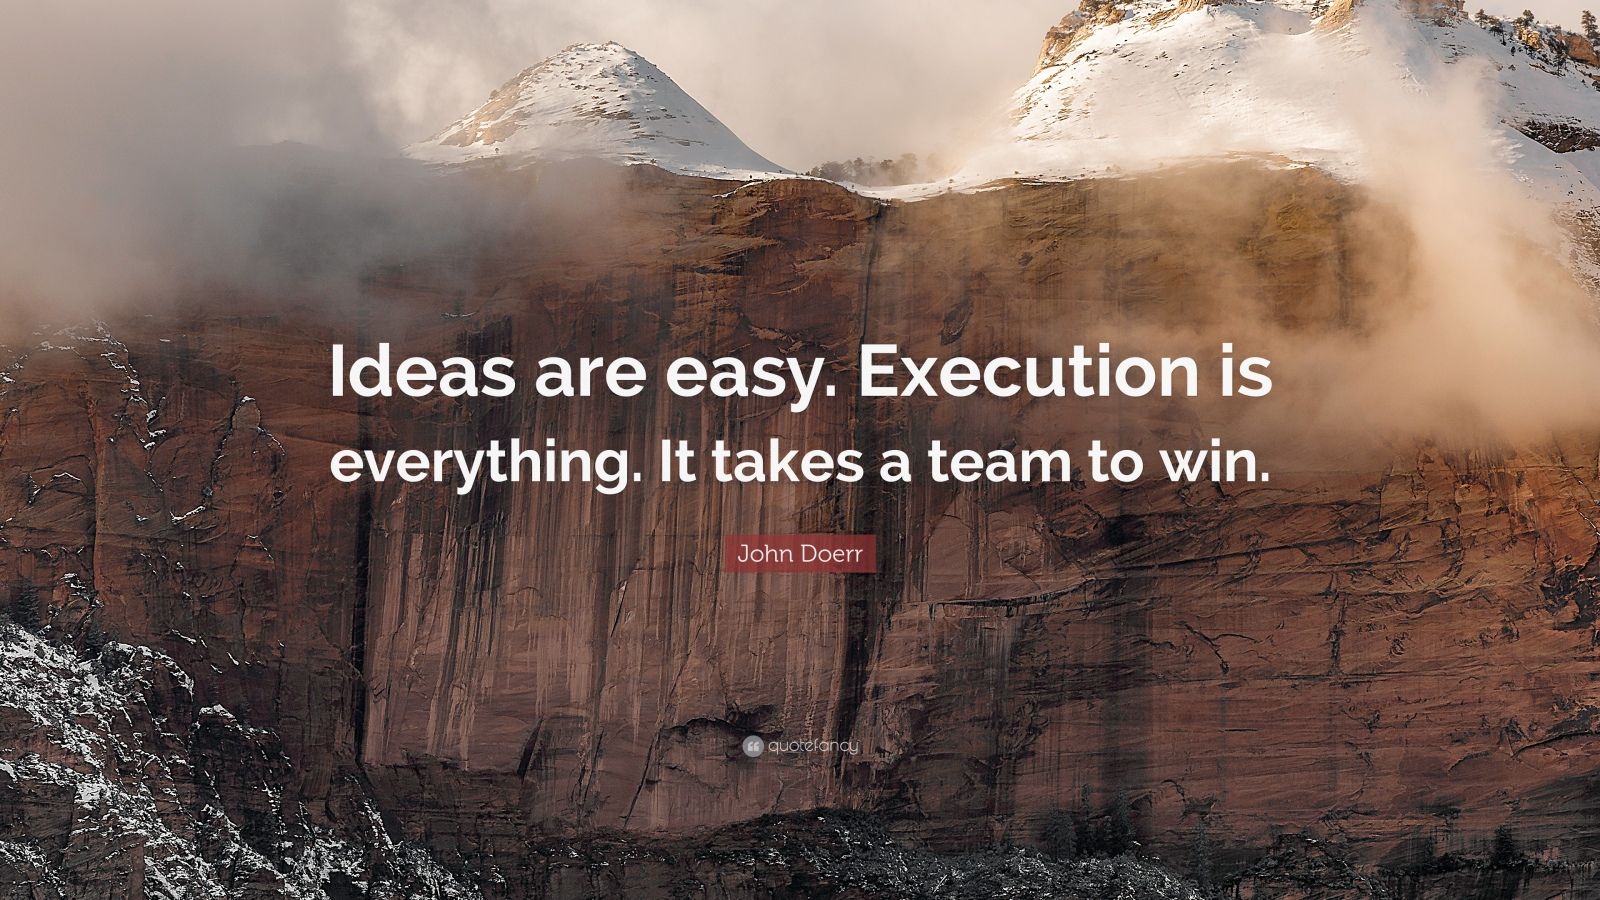 John Doerr Quote: “Ideas are easy. Execution is everything. It takes a